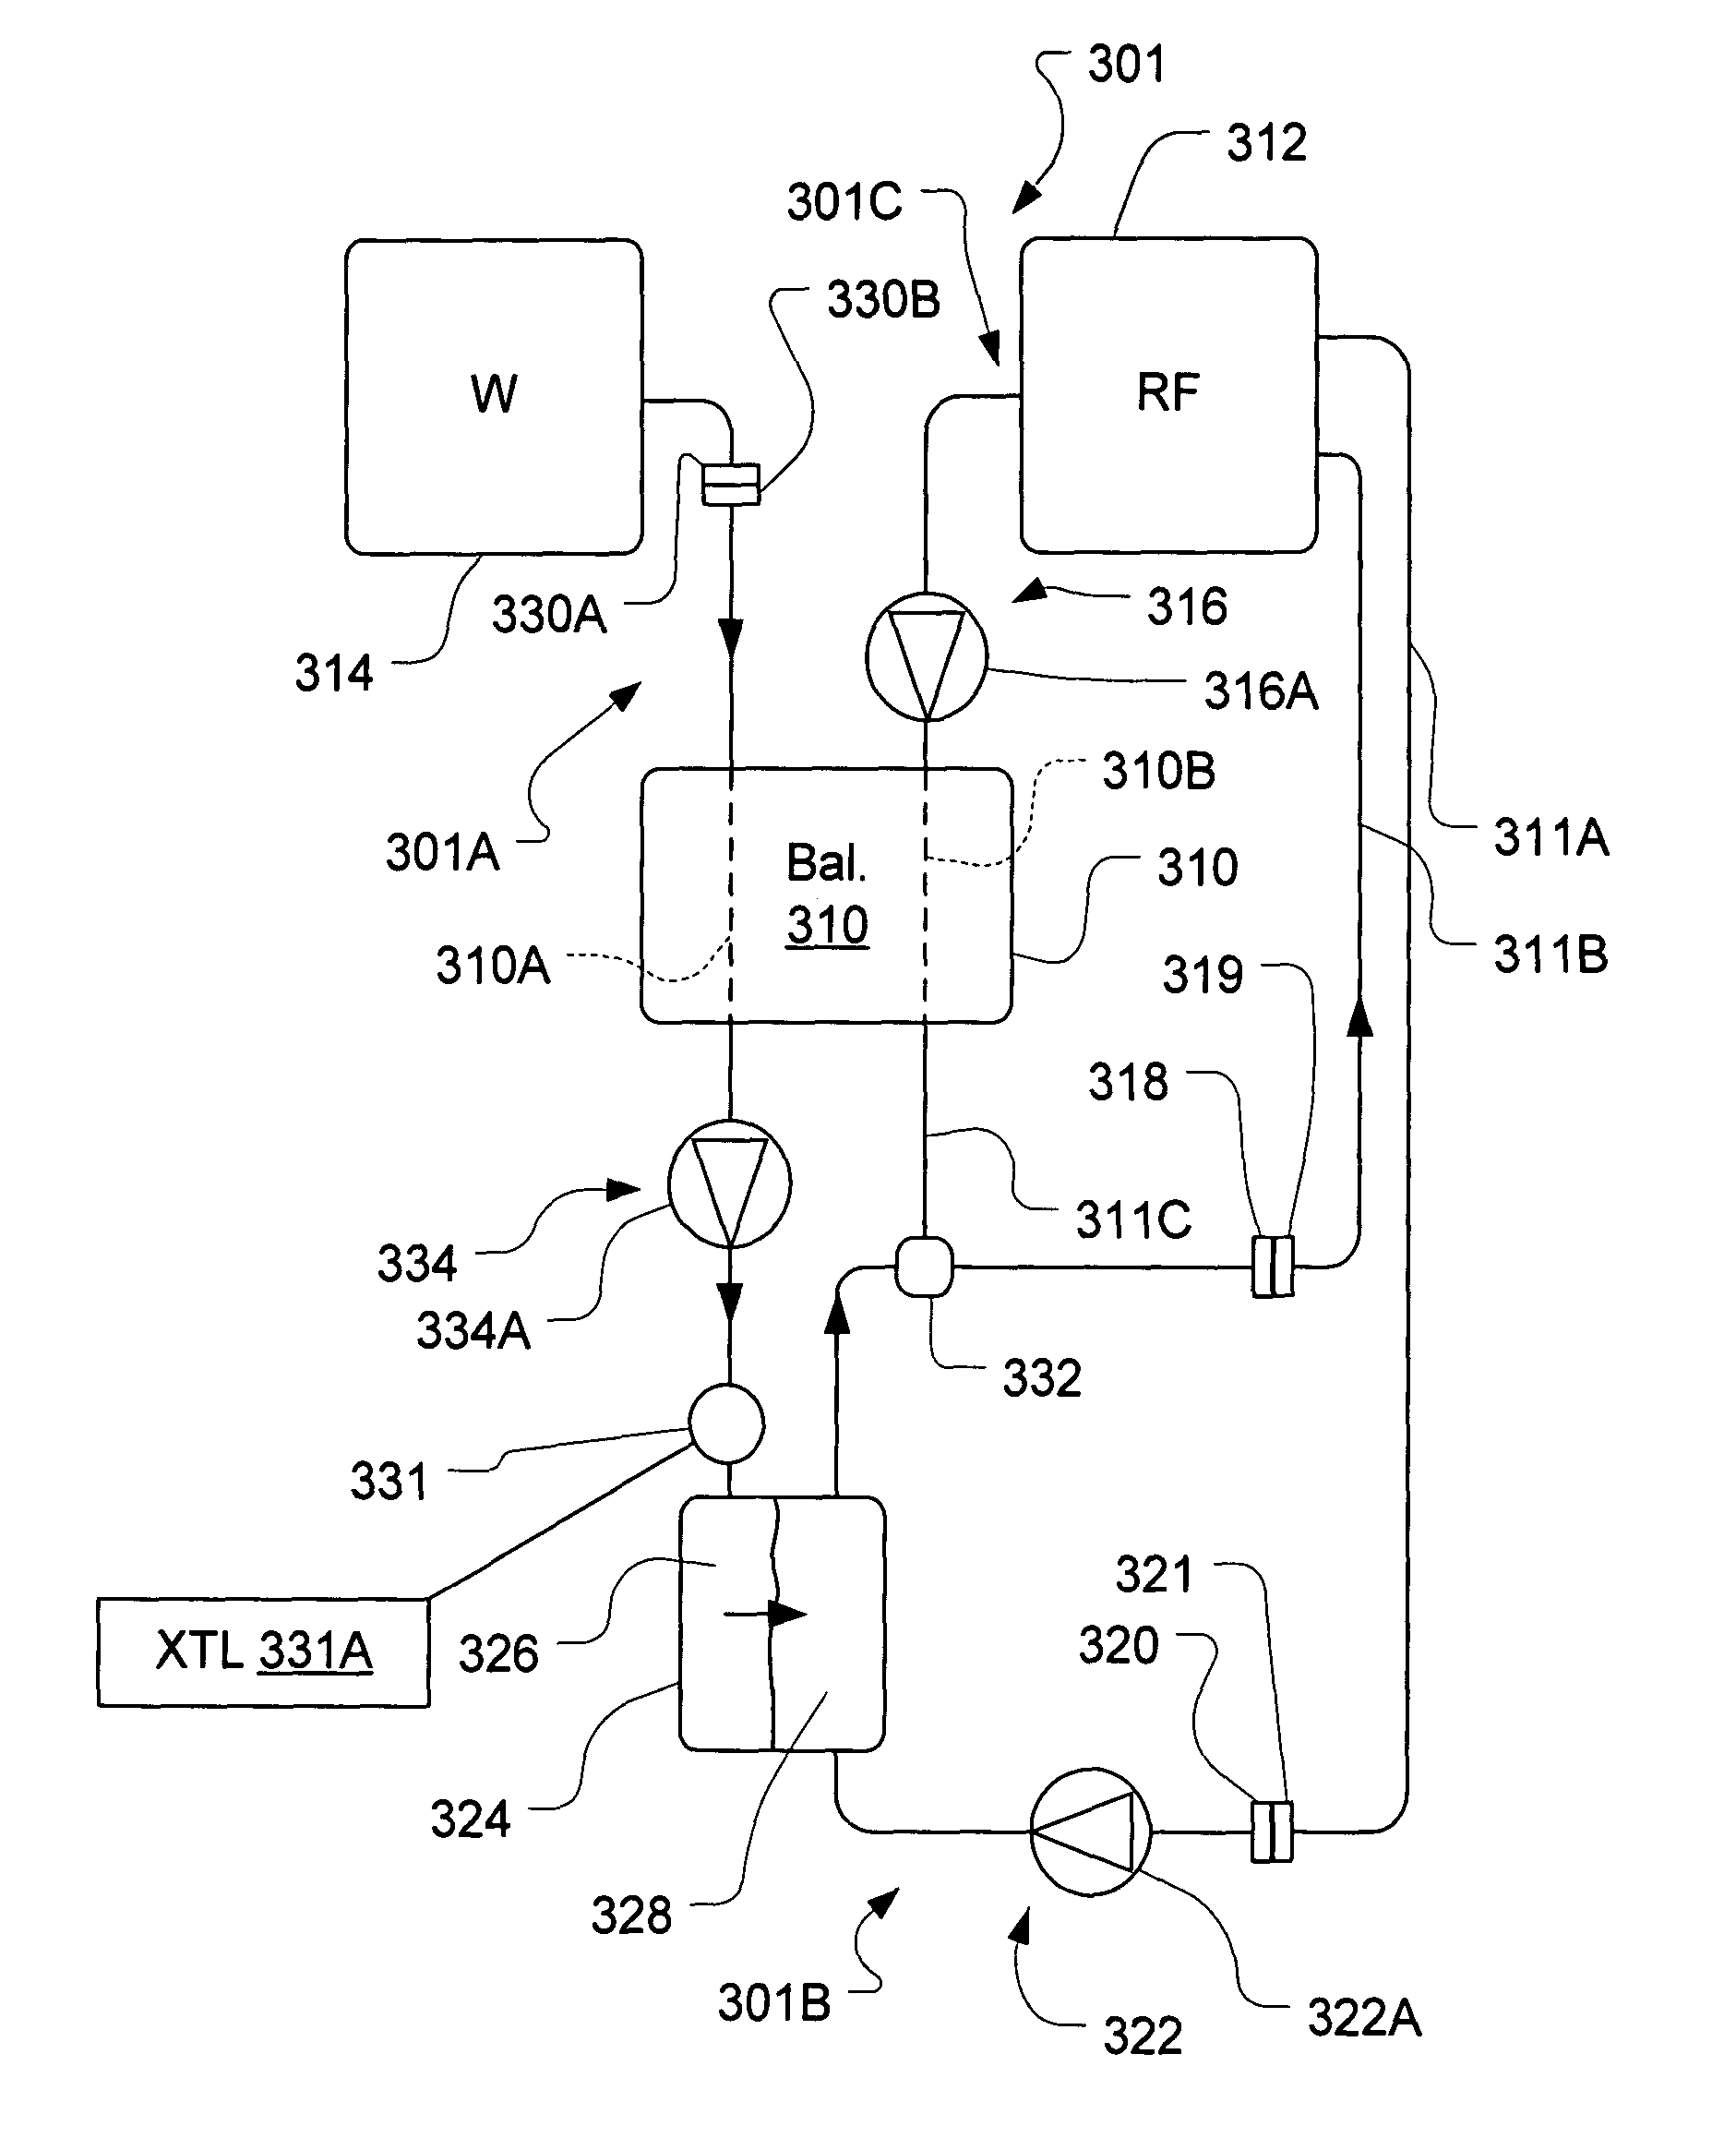 Fluid circuits, systems, and processes for extracorporeal blood processing